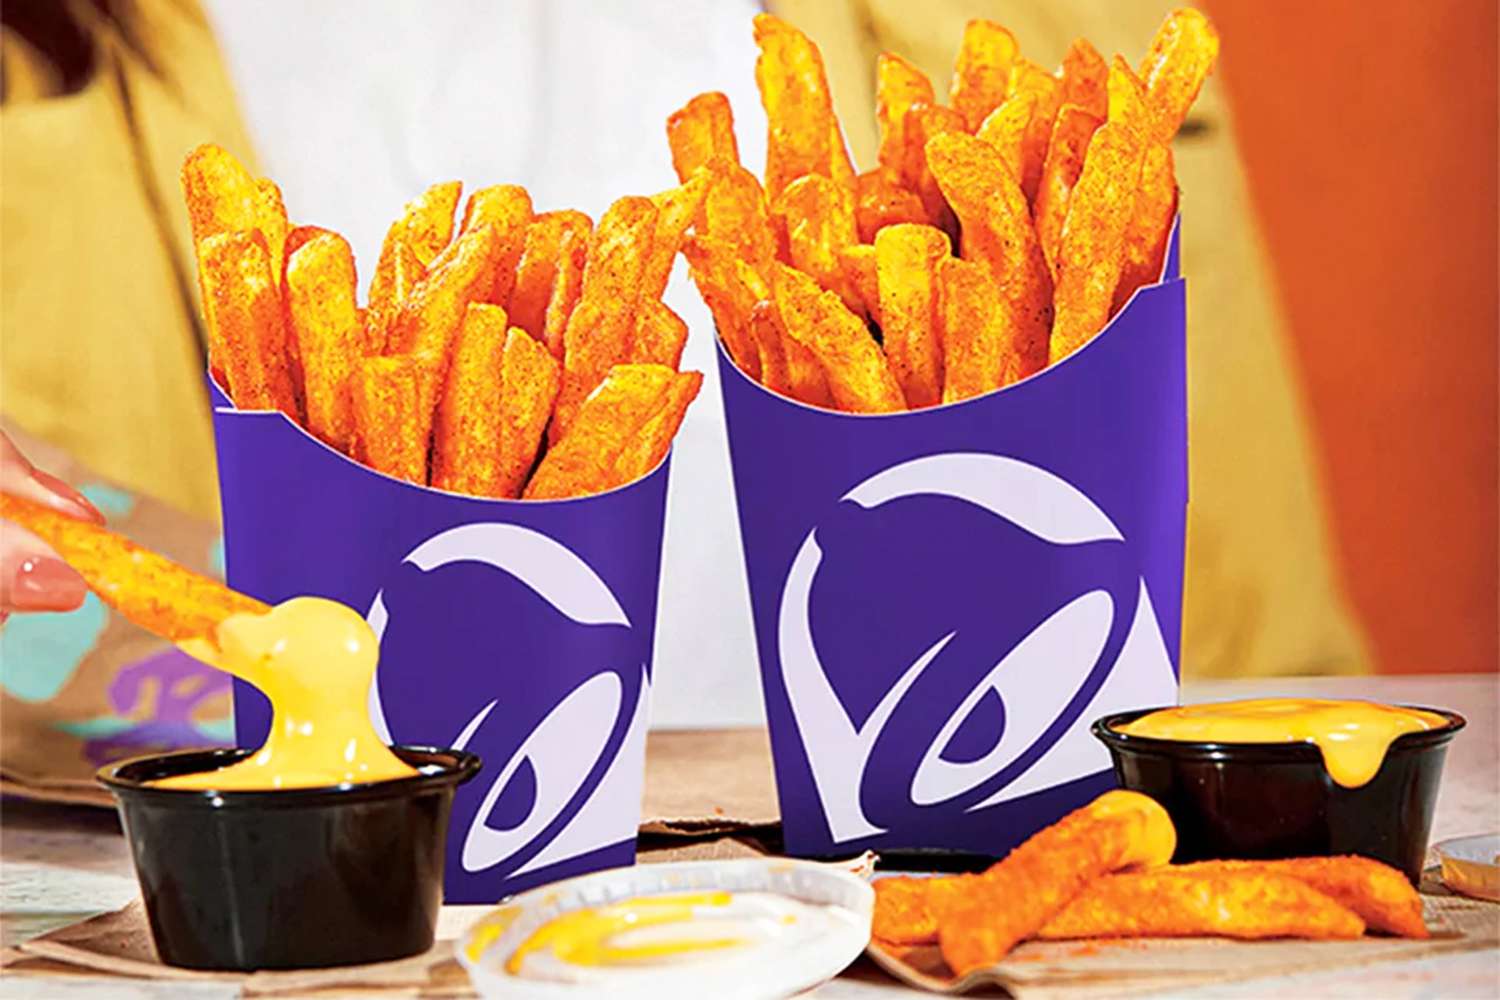 Taco Bell Brings Back $10 Nacho Fries Lover’s Pass for 30 Days of Free Fries